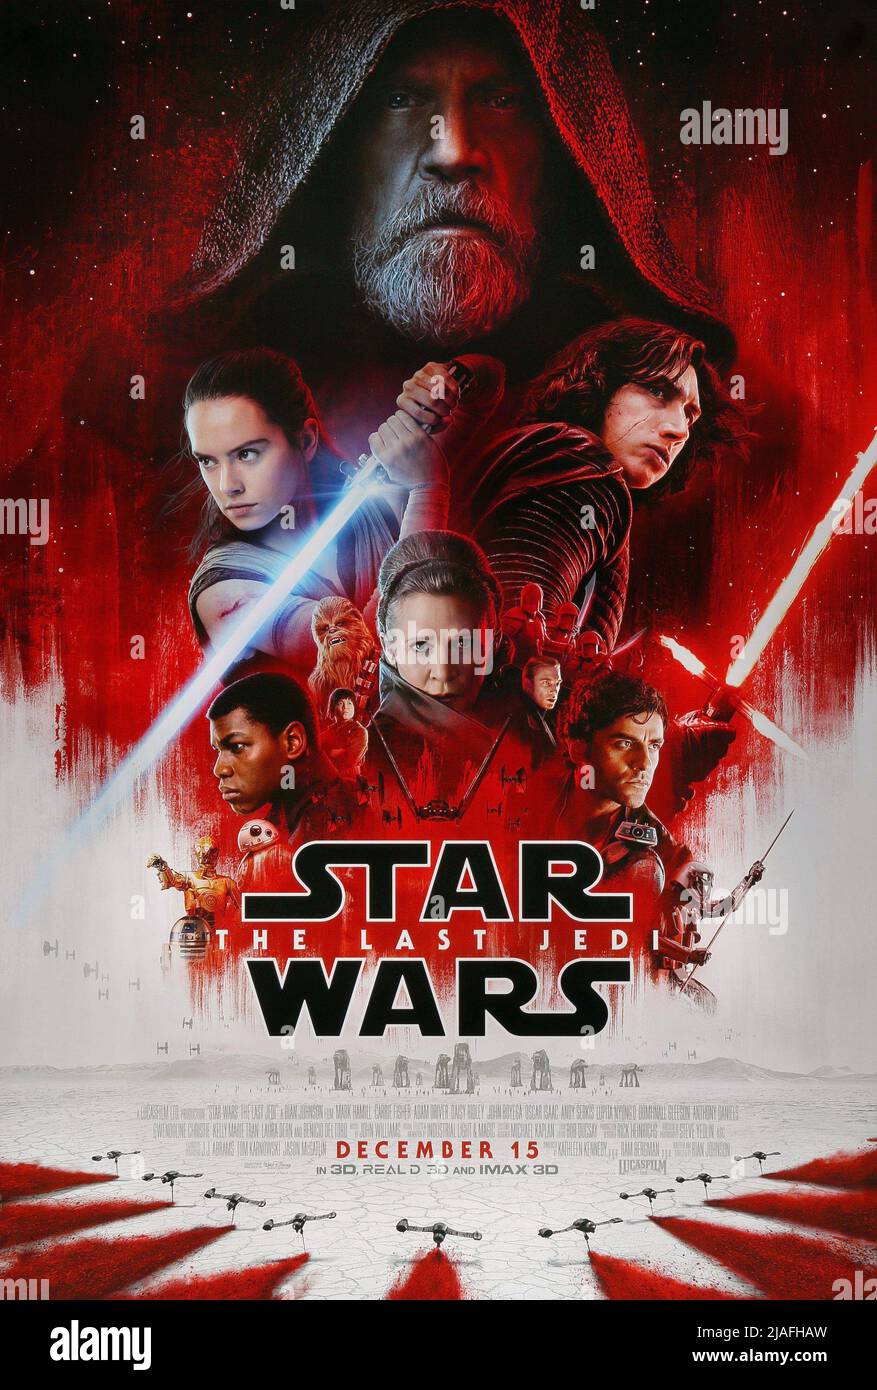 Star Wars: The Rise Of Skywalker' Character Posters [PHOTO GALLERY